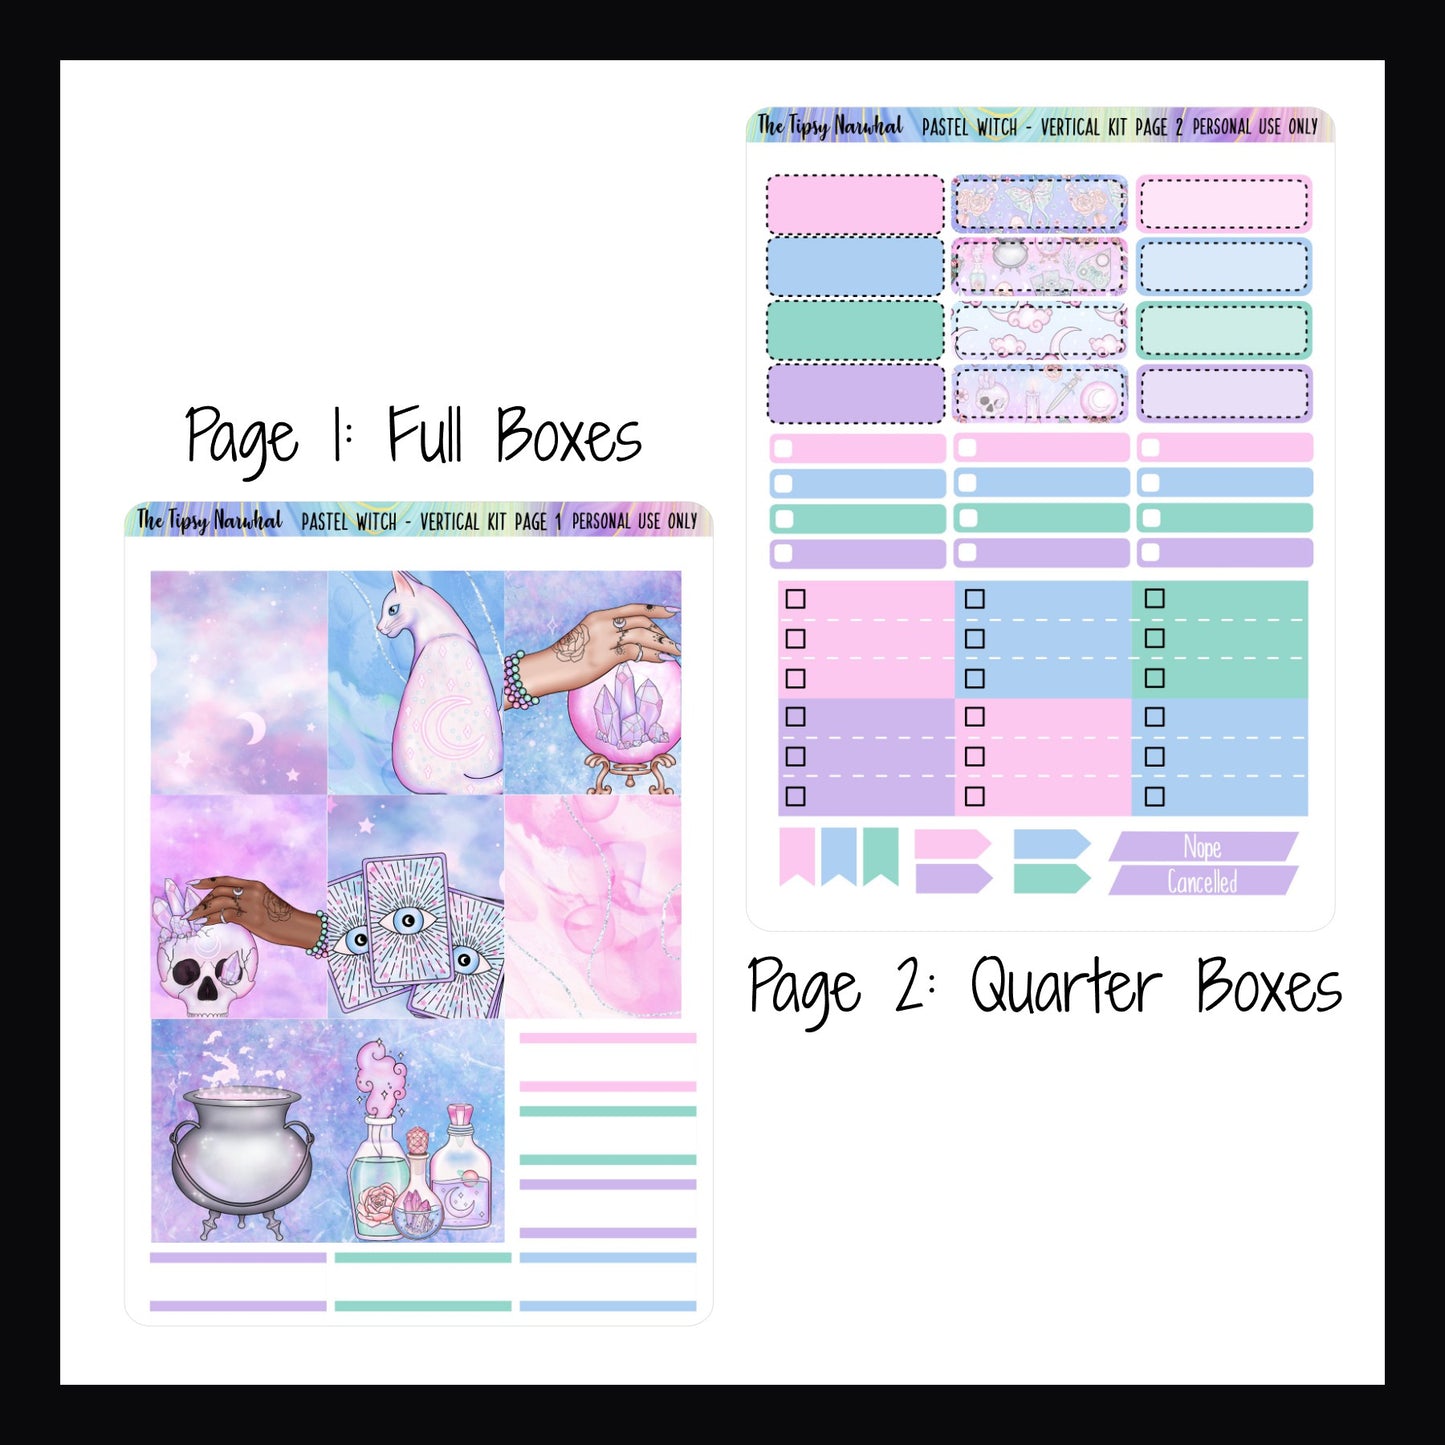 Digital Pastel Witch Vertical Kit pages 1 and 2.  Page 1 features full box deco stickers and quarter box stickers.  Page 2 features additional quarter boxes, skinny check boxes, cancellation stickers, page flags, and top 3 priority check list stickers. 